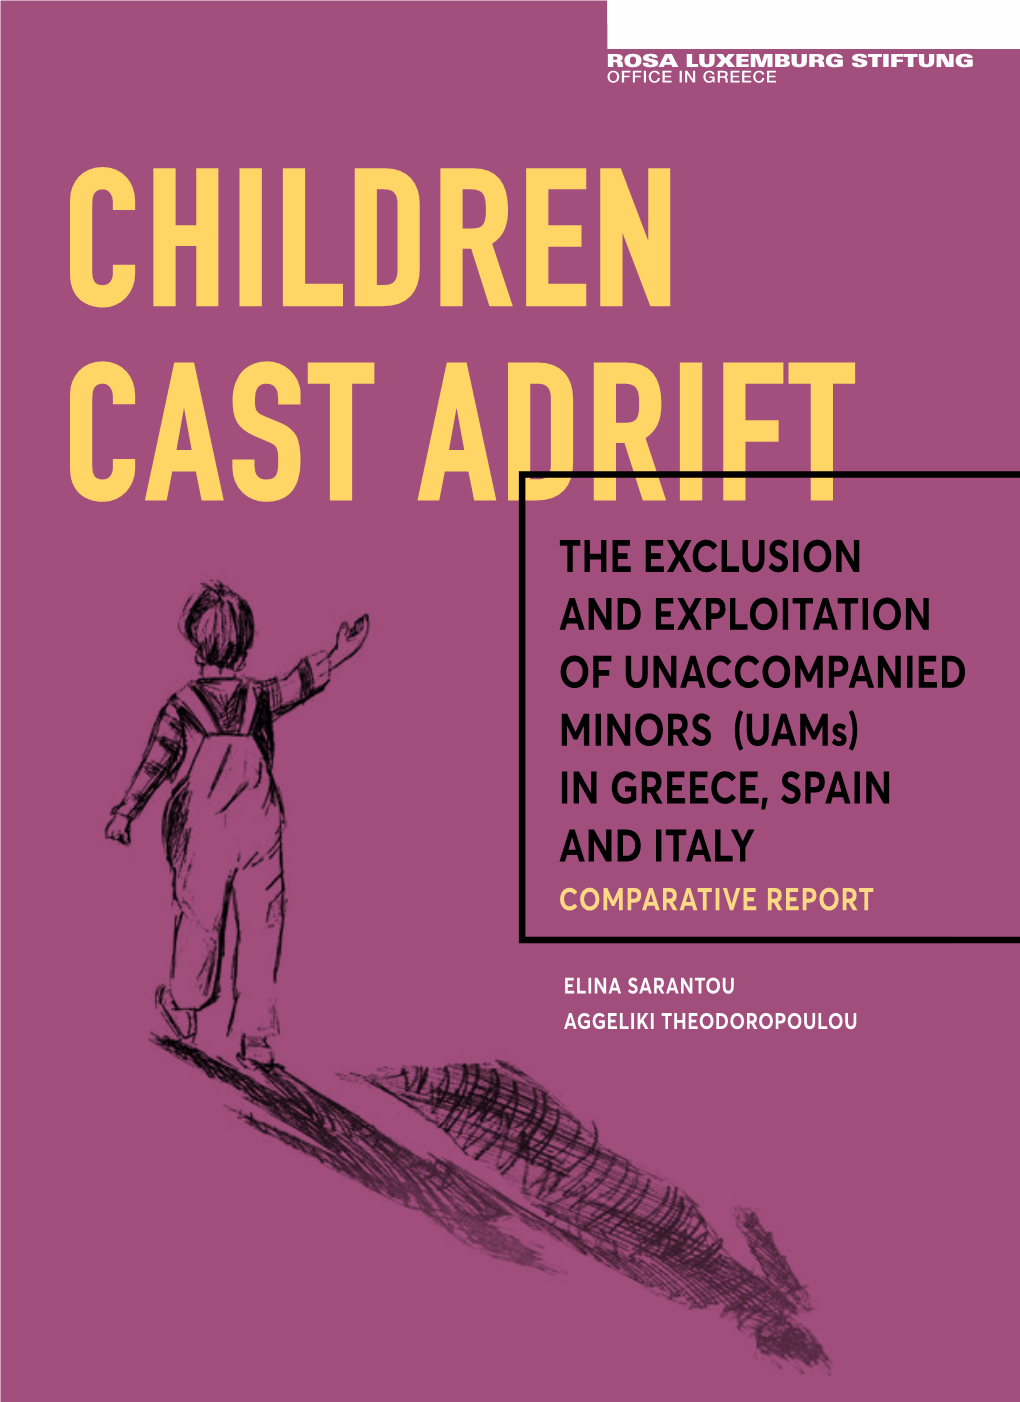 The Exclusion and Exploitation of Unaccompanied Minors (Uams) in Greece, Spain and Italy